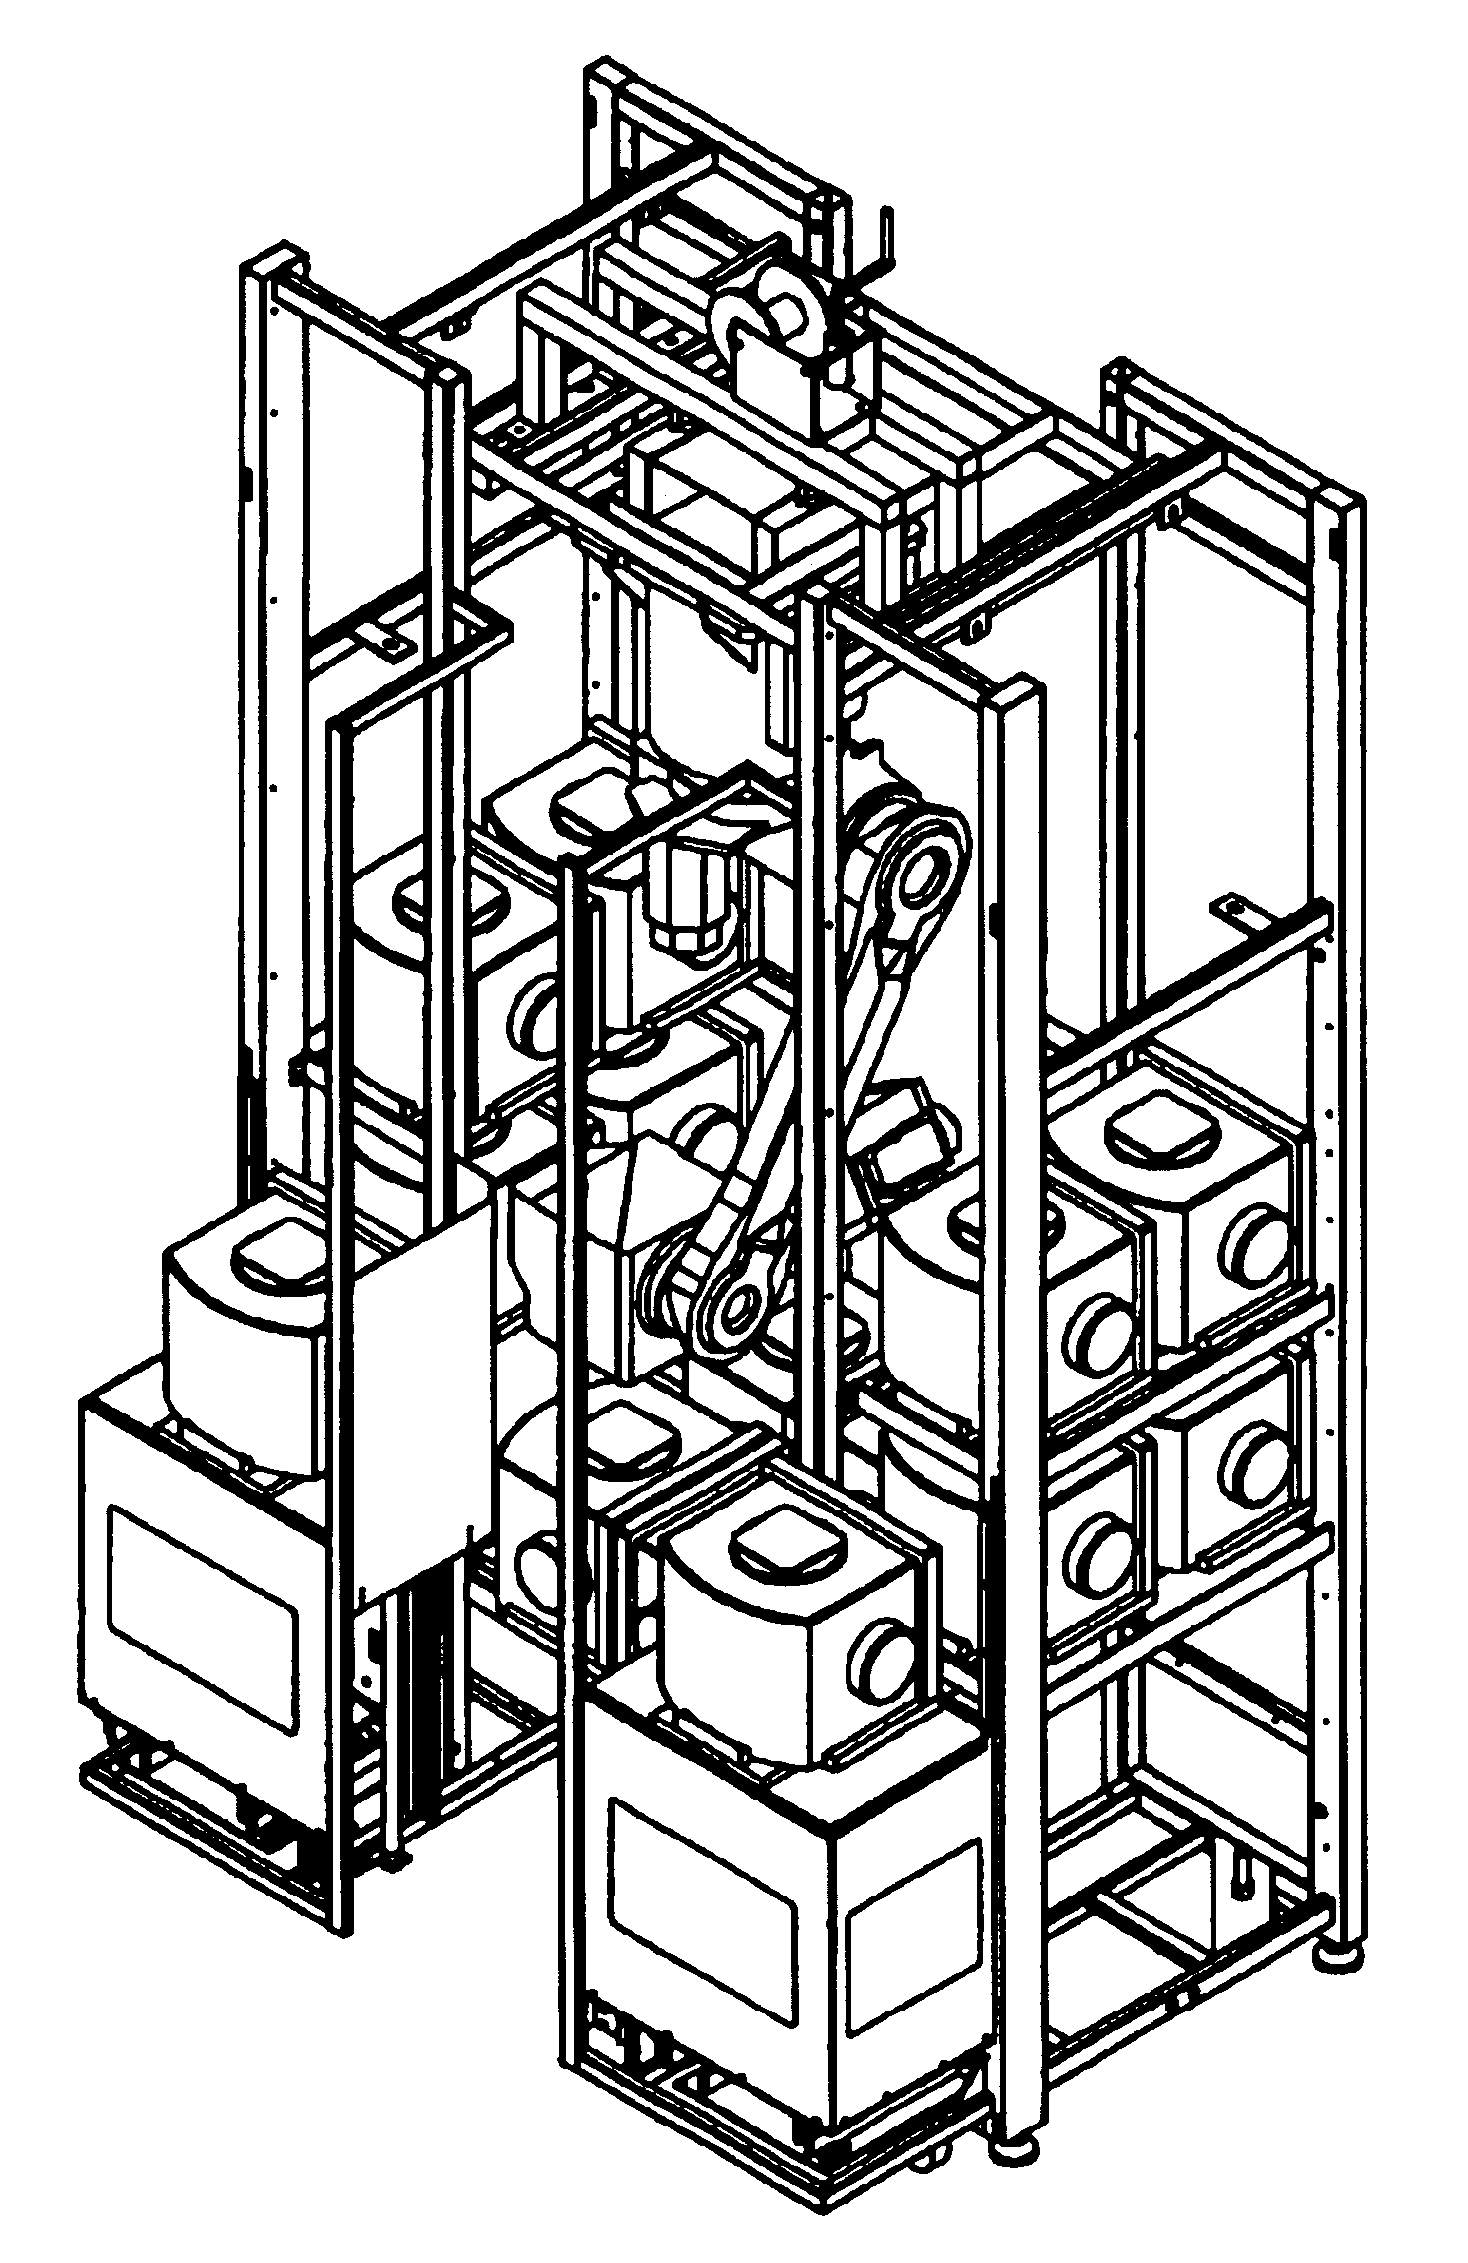 Robotic storage buffer system for substrate carrier pods